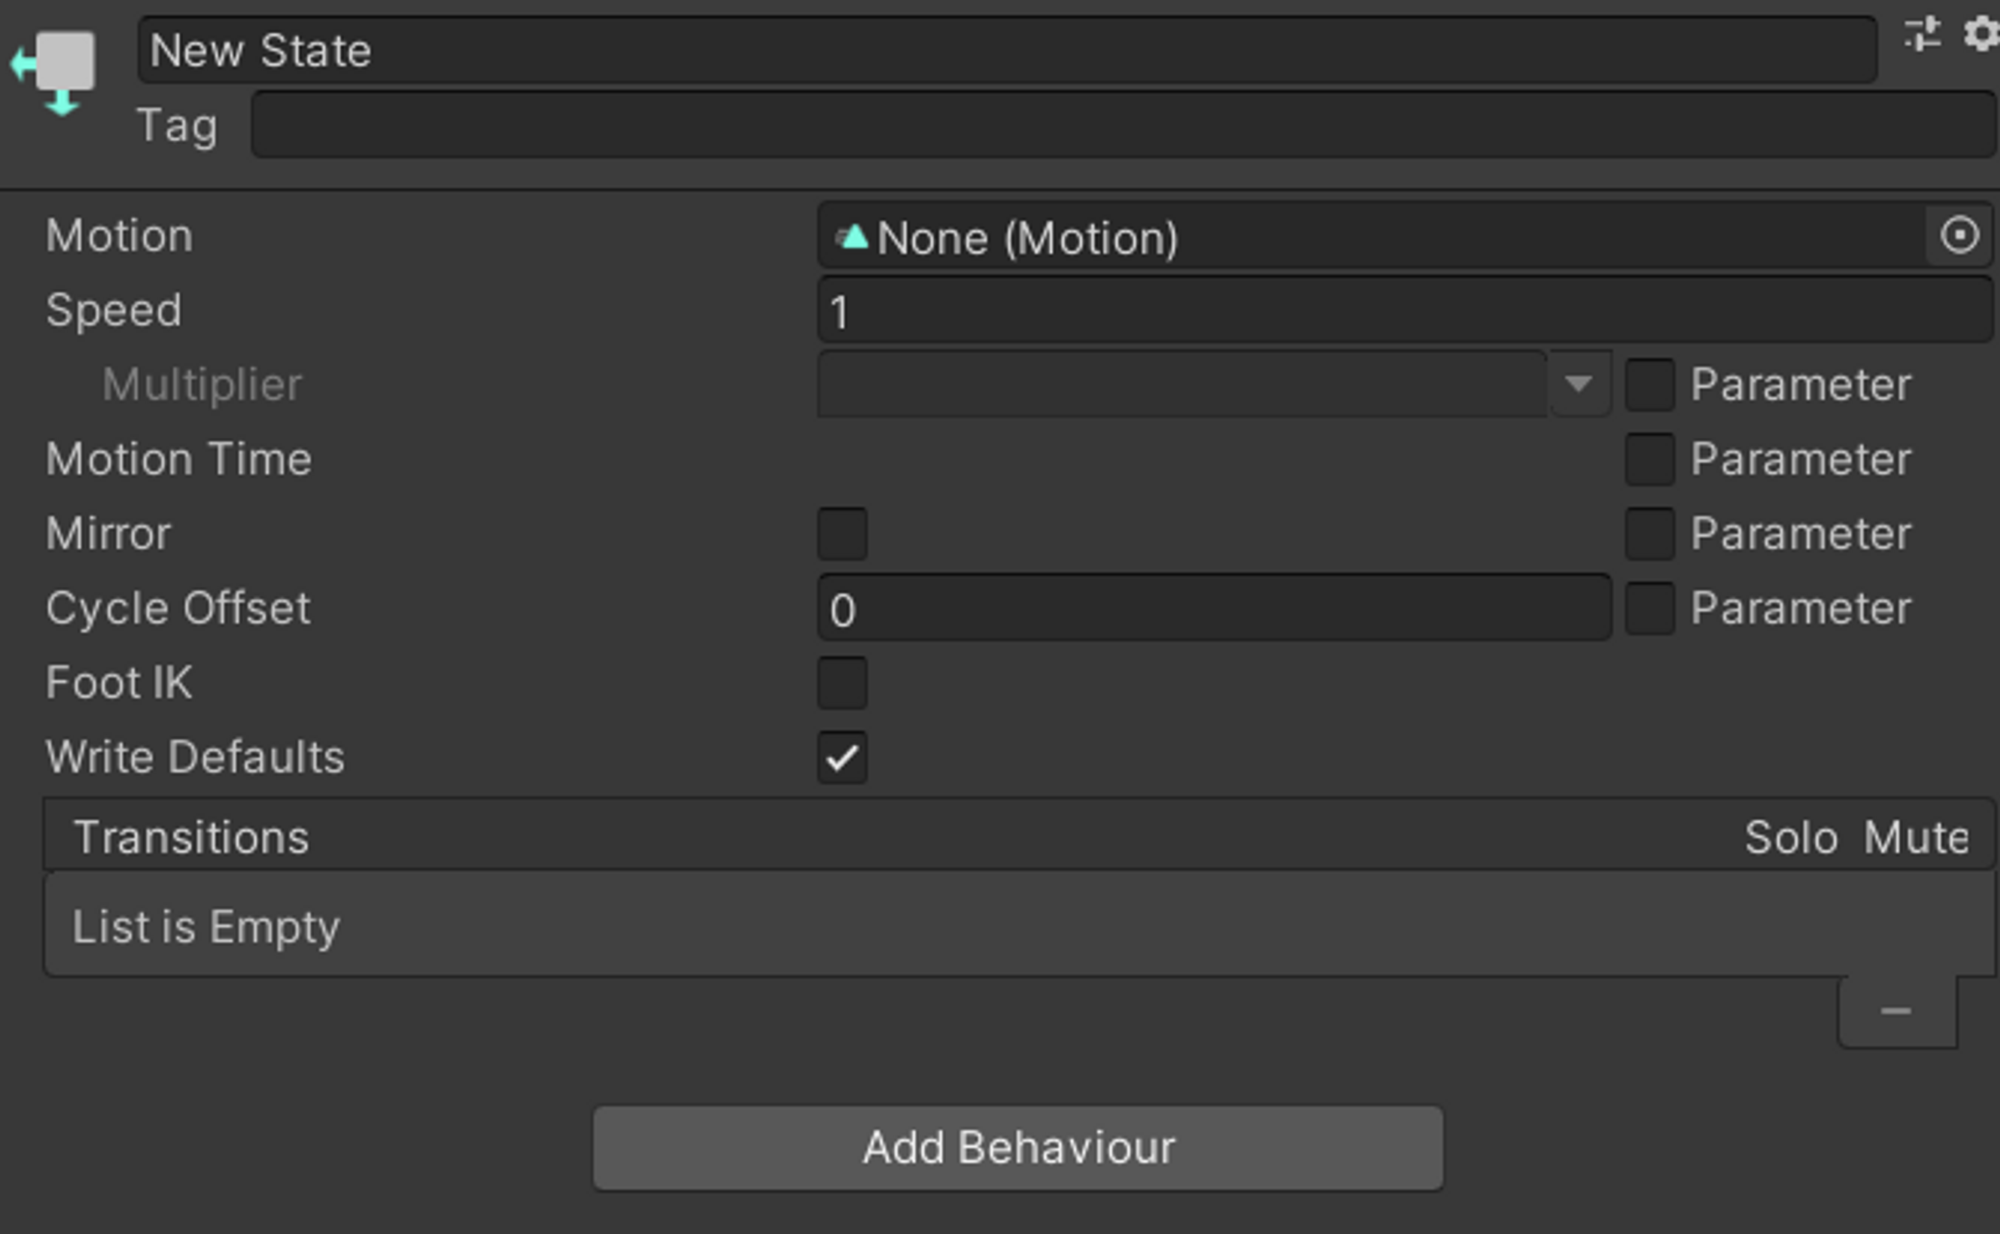 The default animator state, which defaults to Write Defaults on.